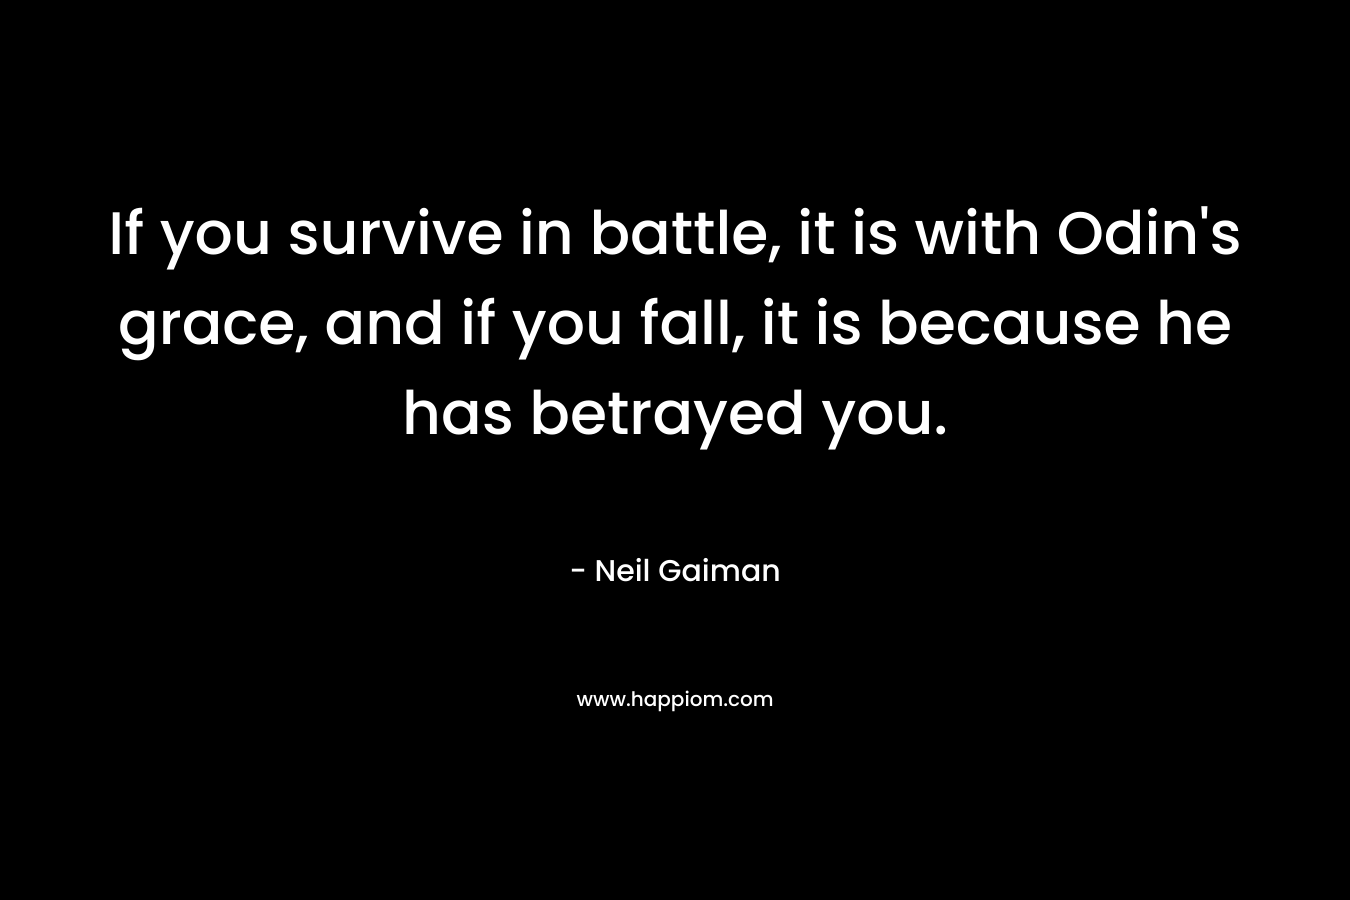 If you survive in battle, it is with Odin's grace, and if you fall, it is because he has betrayed you.